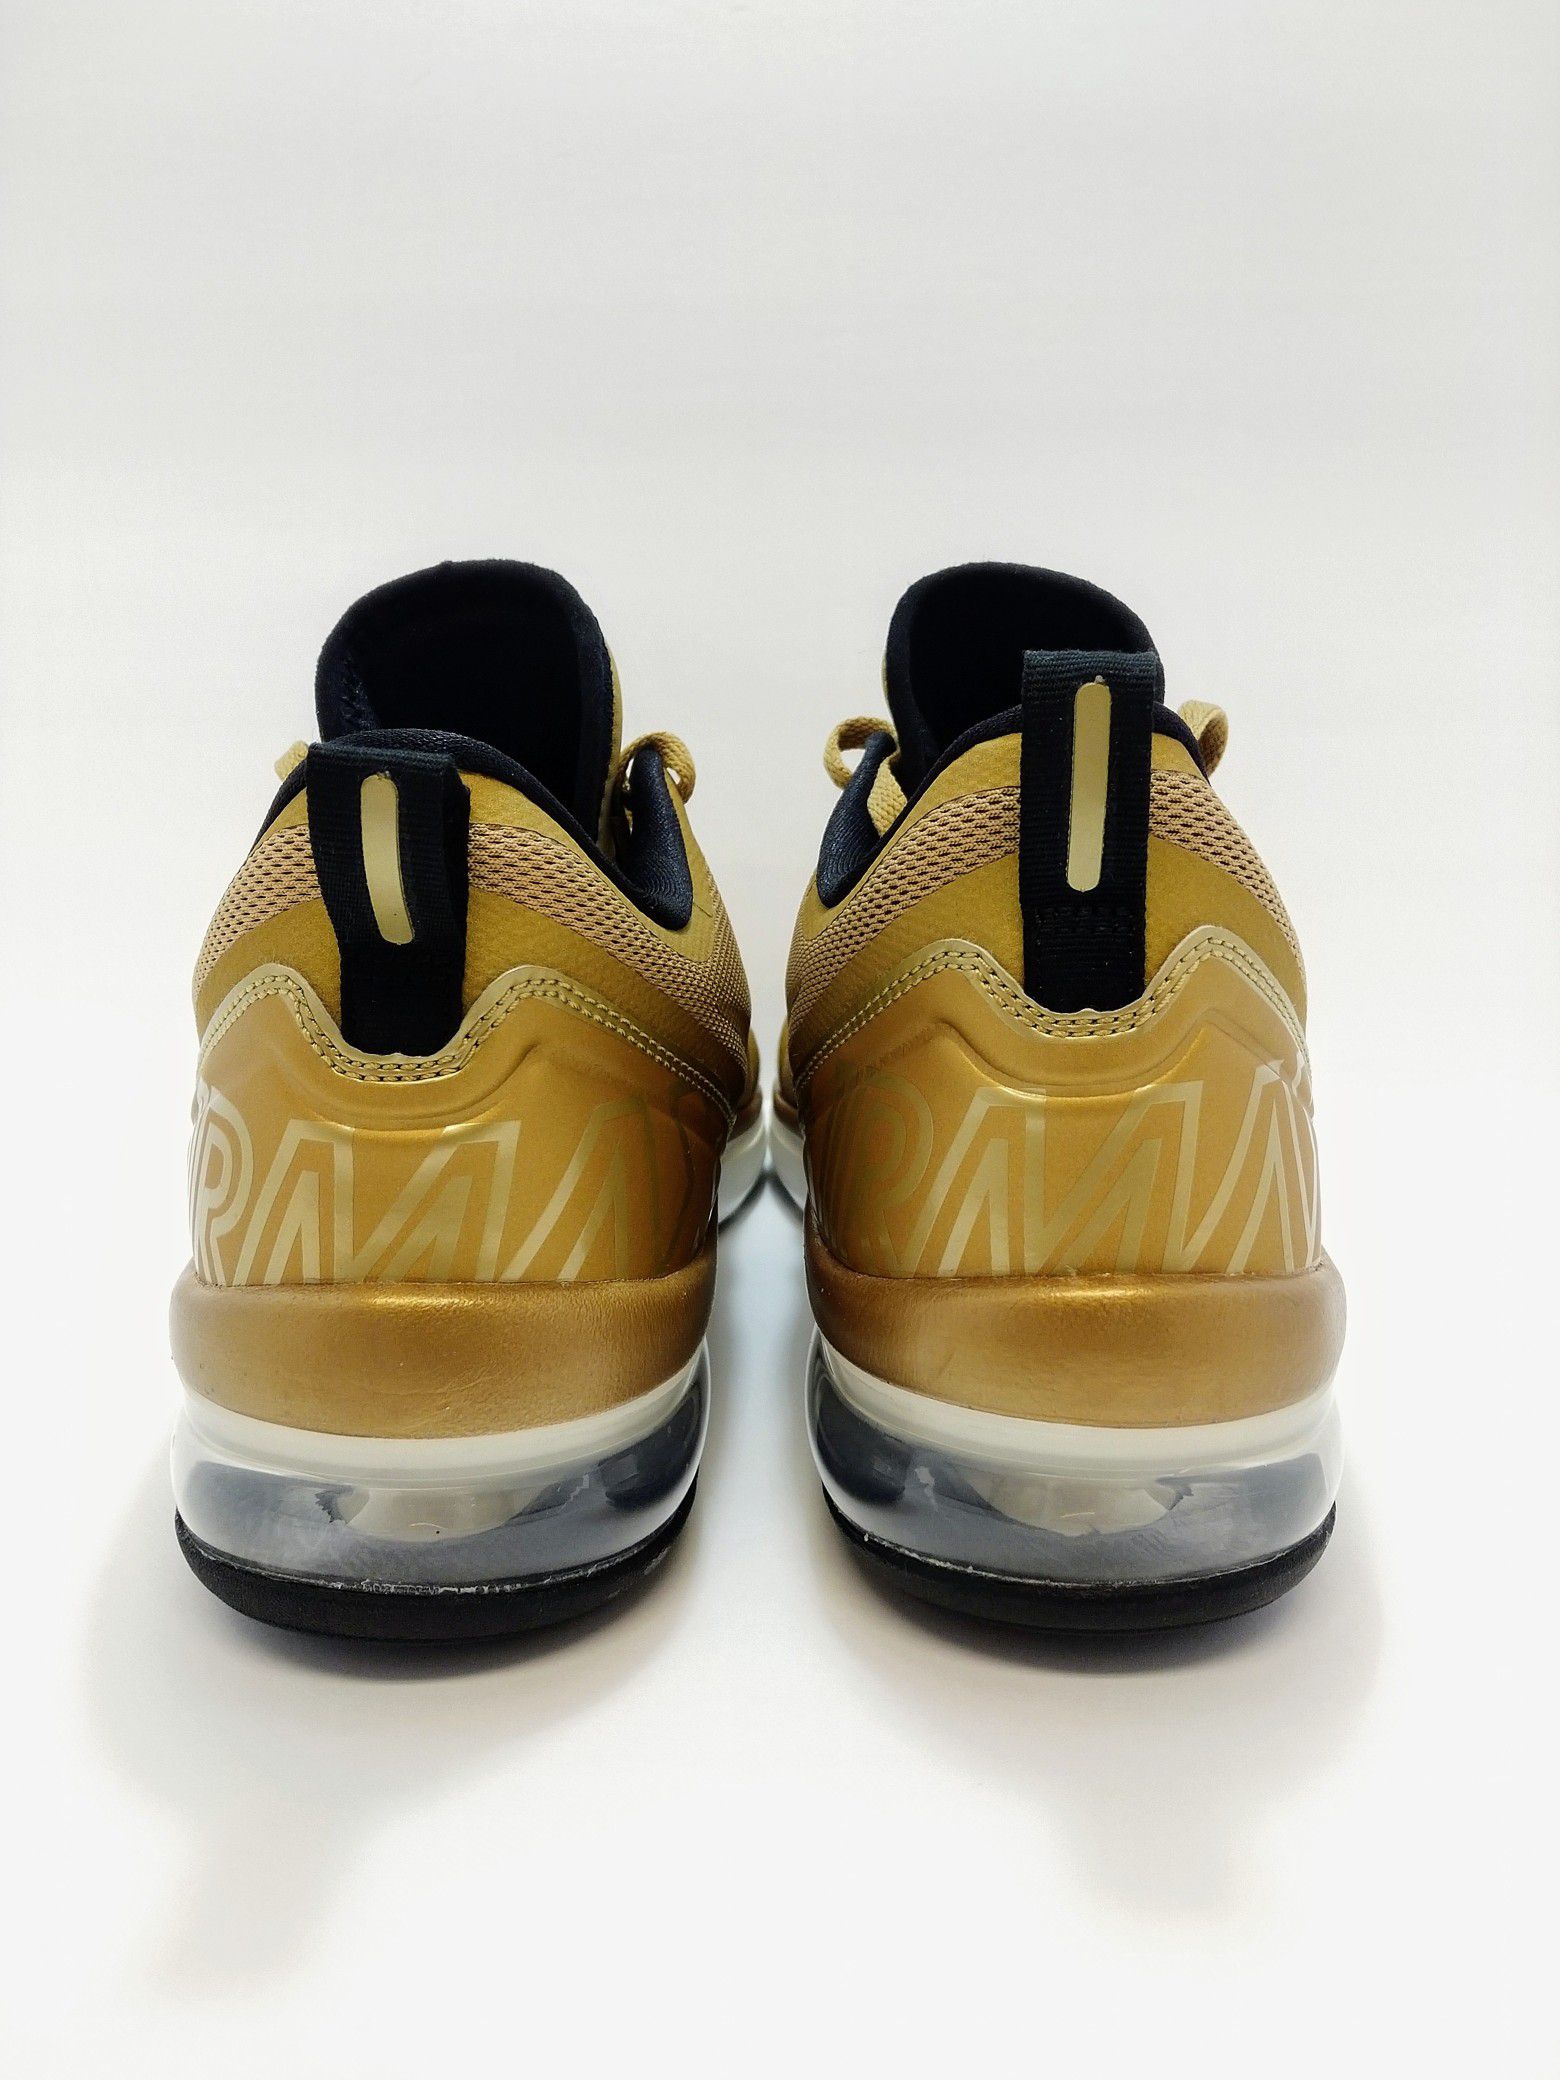 NIKE AIR MAX FURY SHOES metallic gold red desert AA5739 700 MSRP $120 ...